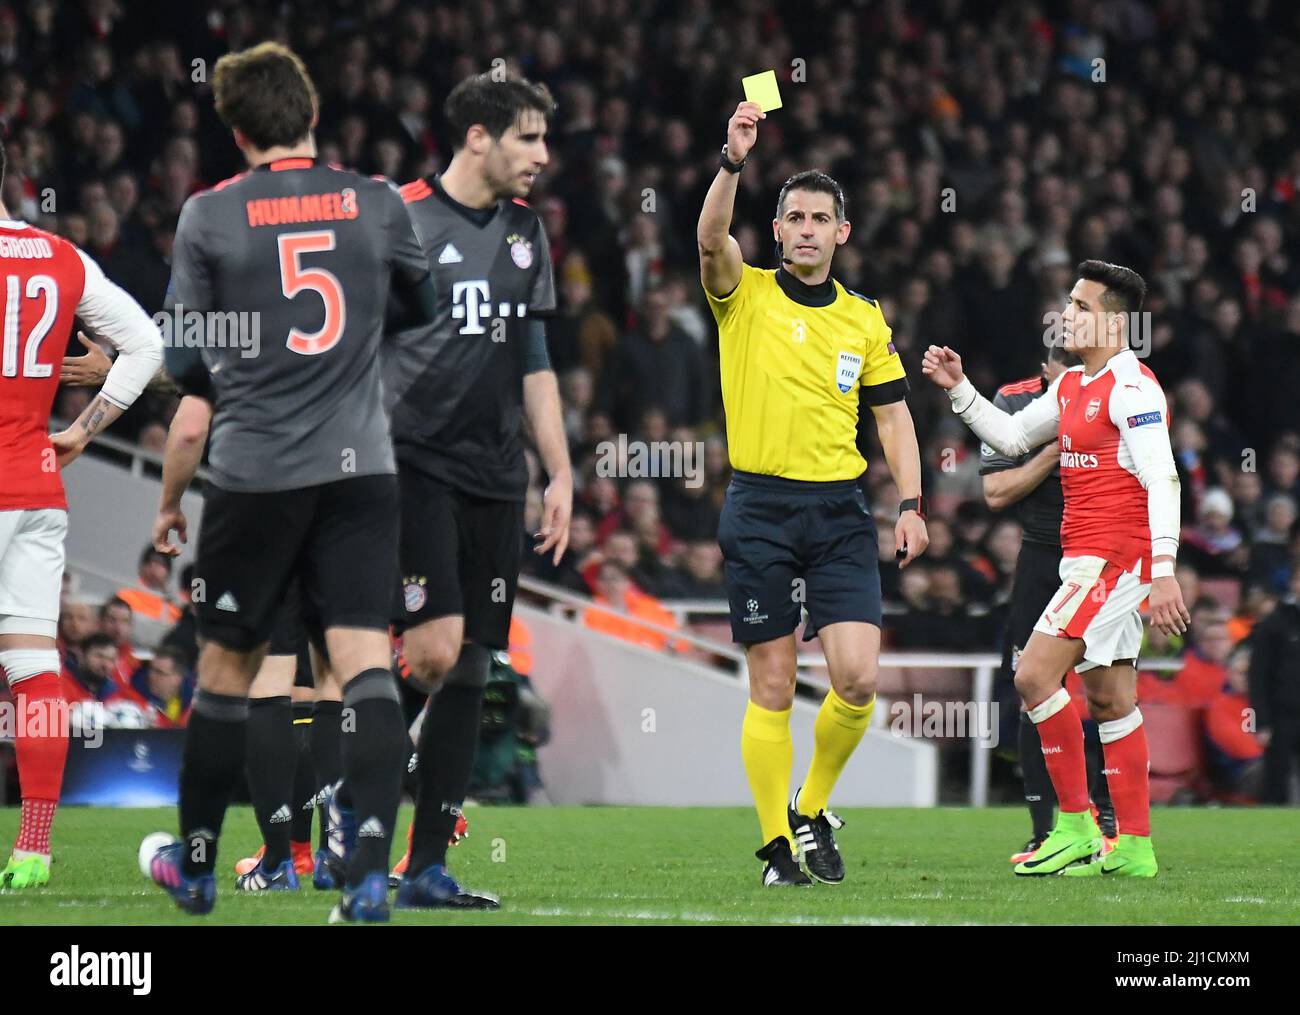 LONDON, ENGLAND - MARCH 7, 2017: Greek FIFA referee Tasos Sidiropoulos shows a yellow card during the second leg of the UEFA Champions League Round of 16 game between Arsenal FC and Bayern Munchen at Emirates Stadium. Copyright: Cosmin Iftode/Picstaff Stock Photo